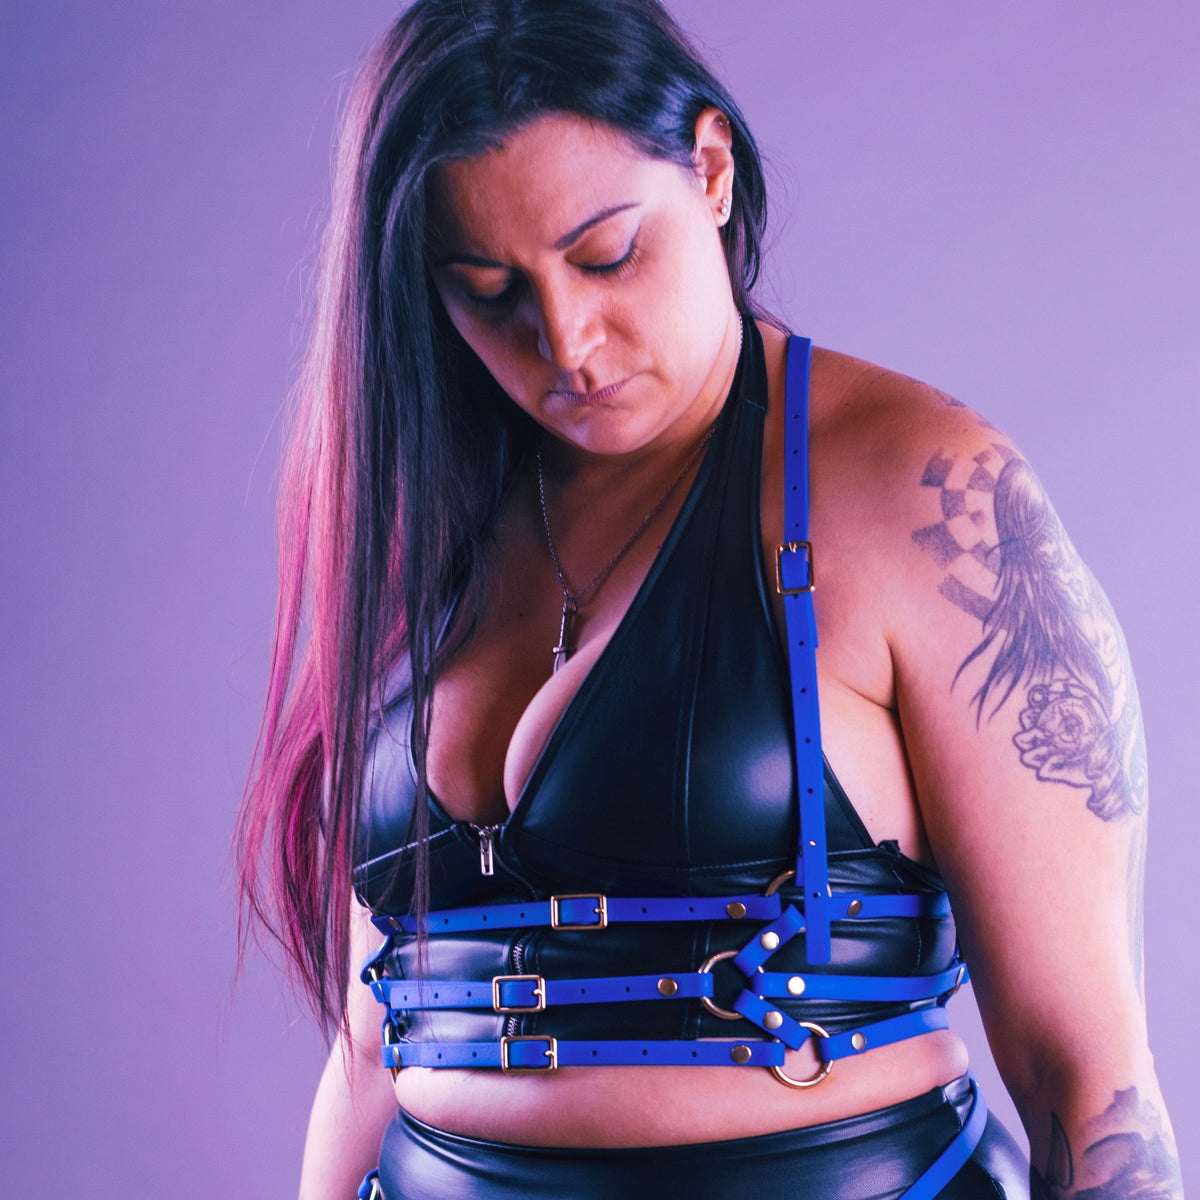 Woman wearing an electric blue waist harness over her black leather look top.